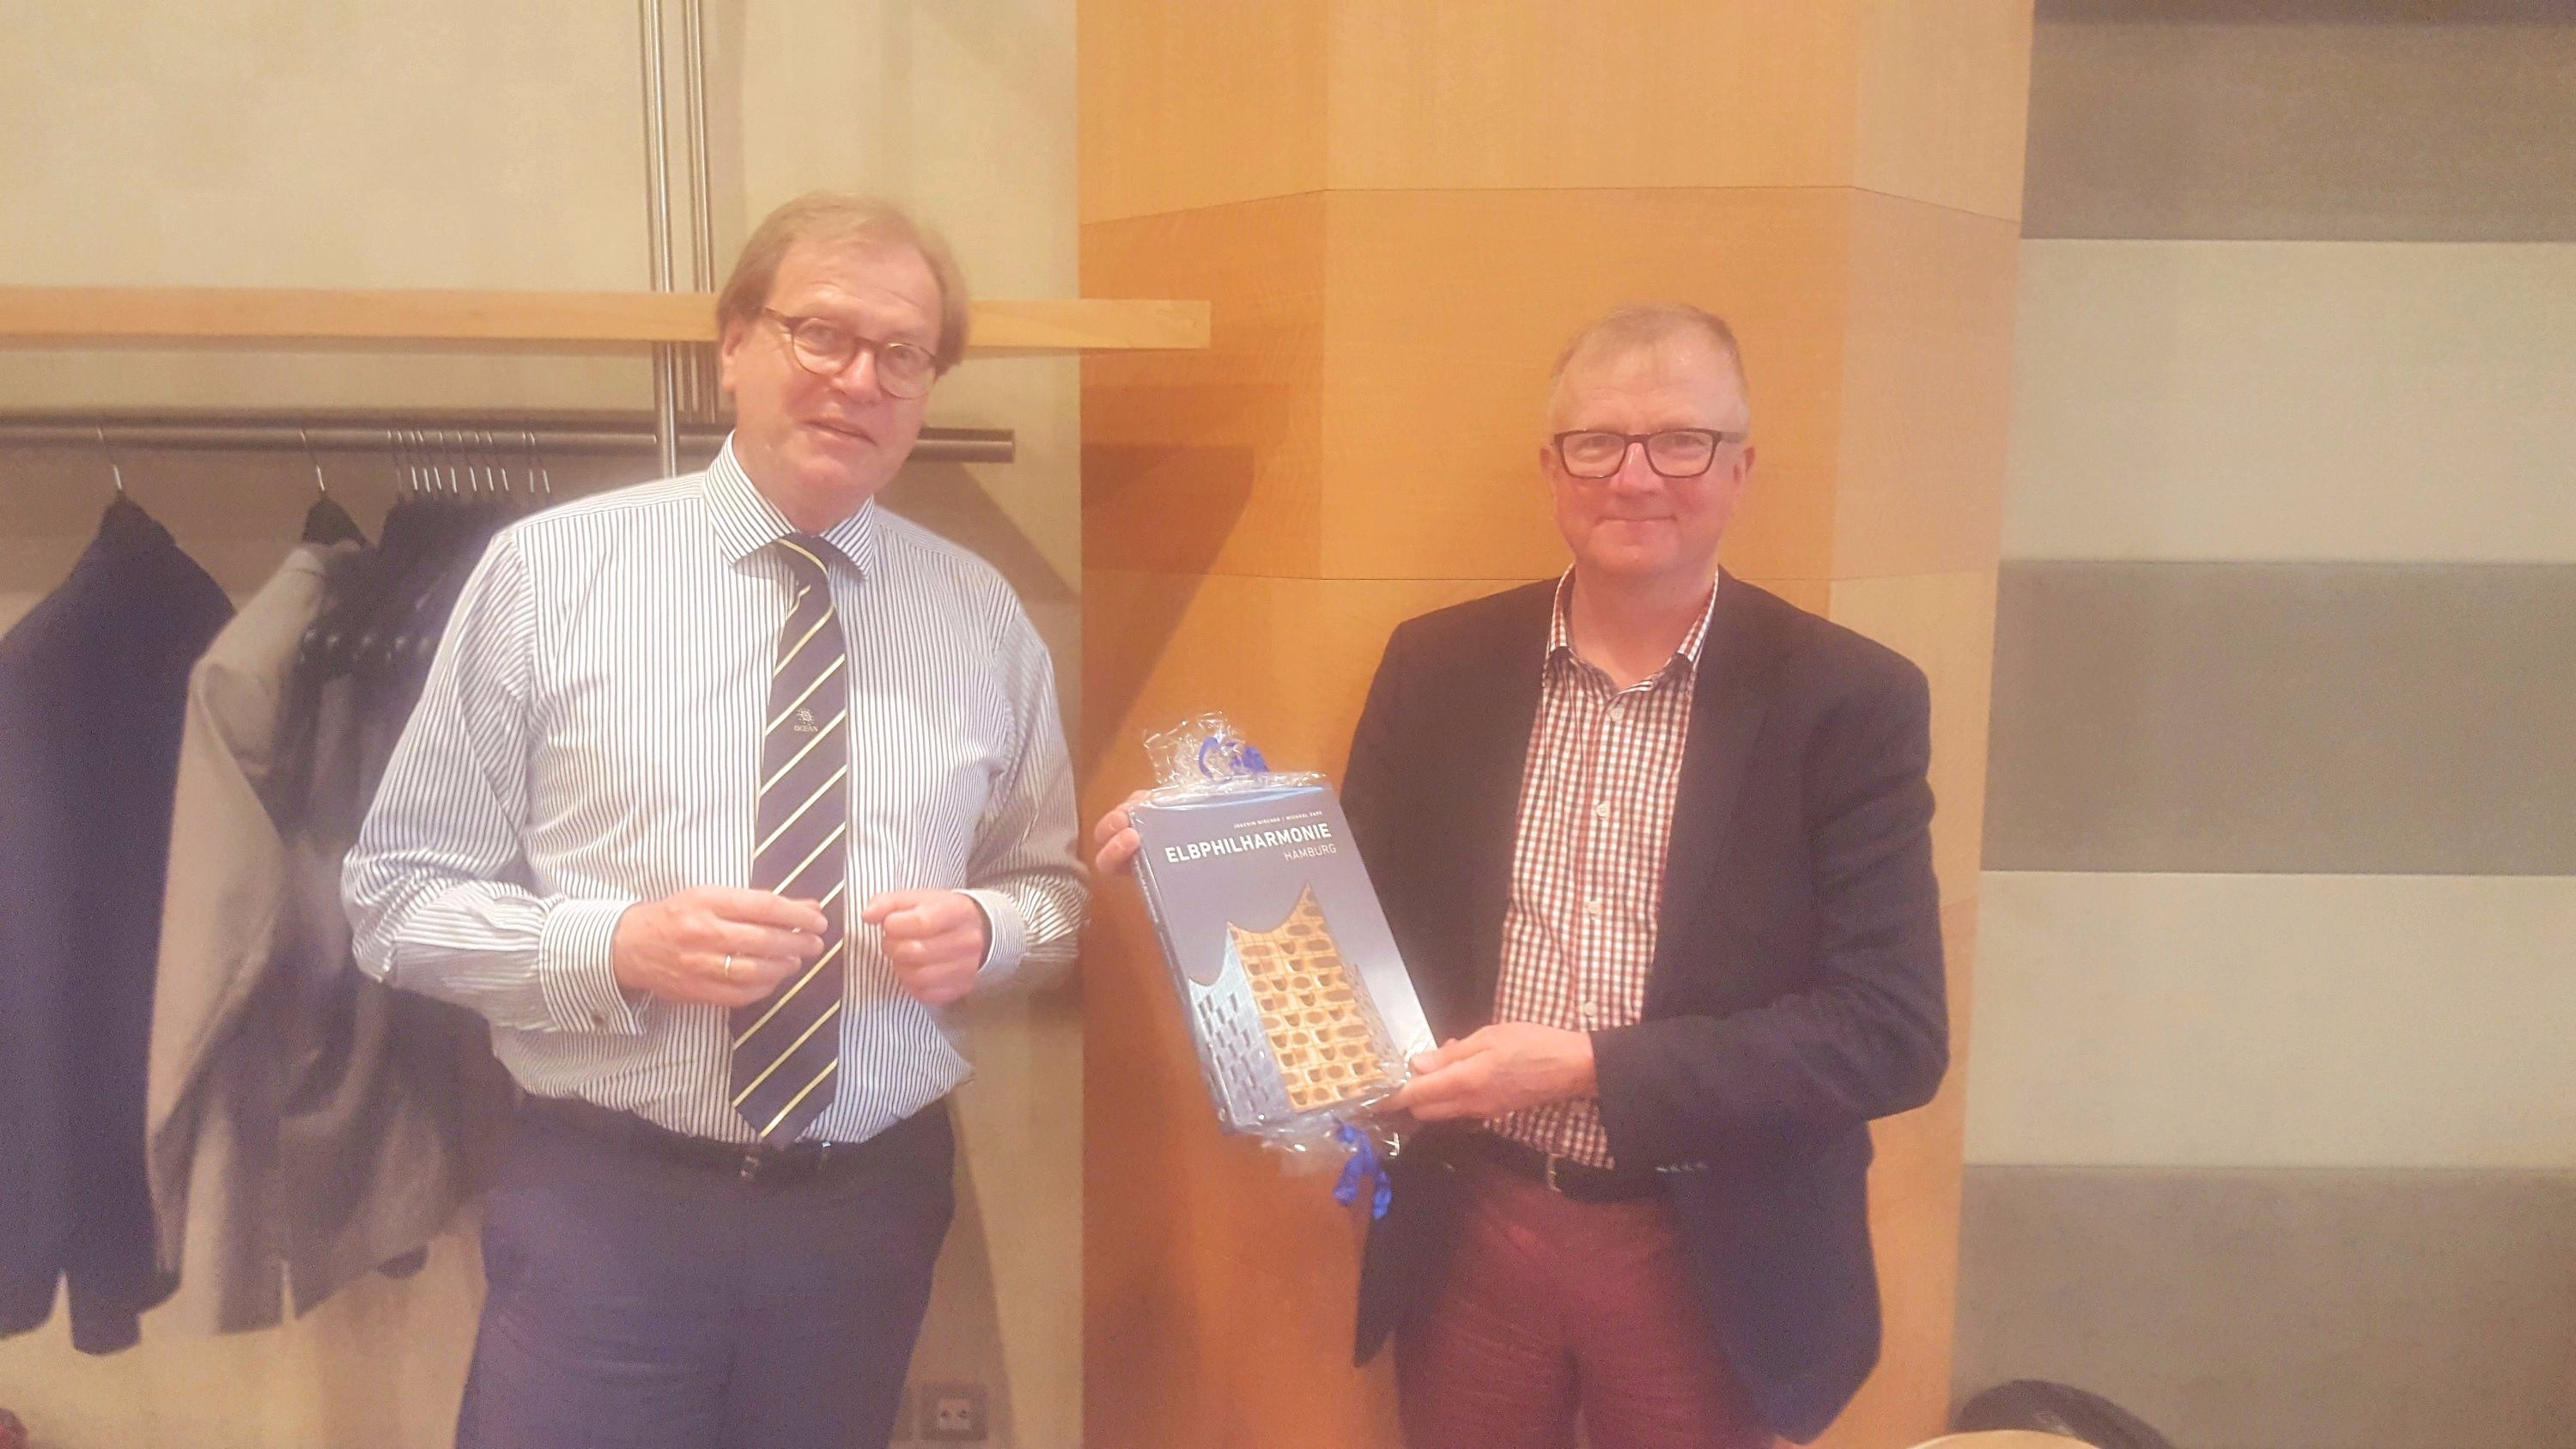 Wolfgang Sump (left) presents the souvenir book to Matti Kokkala to mark his many years of distinguished service to OCEAN and to wish him a long and happy retirement.